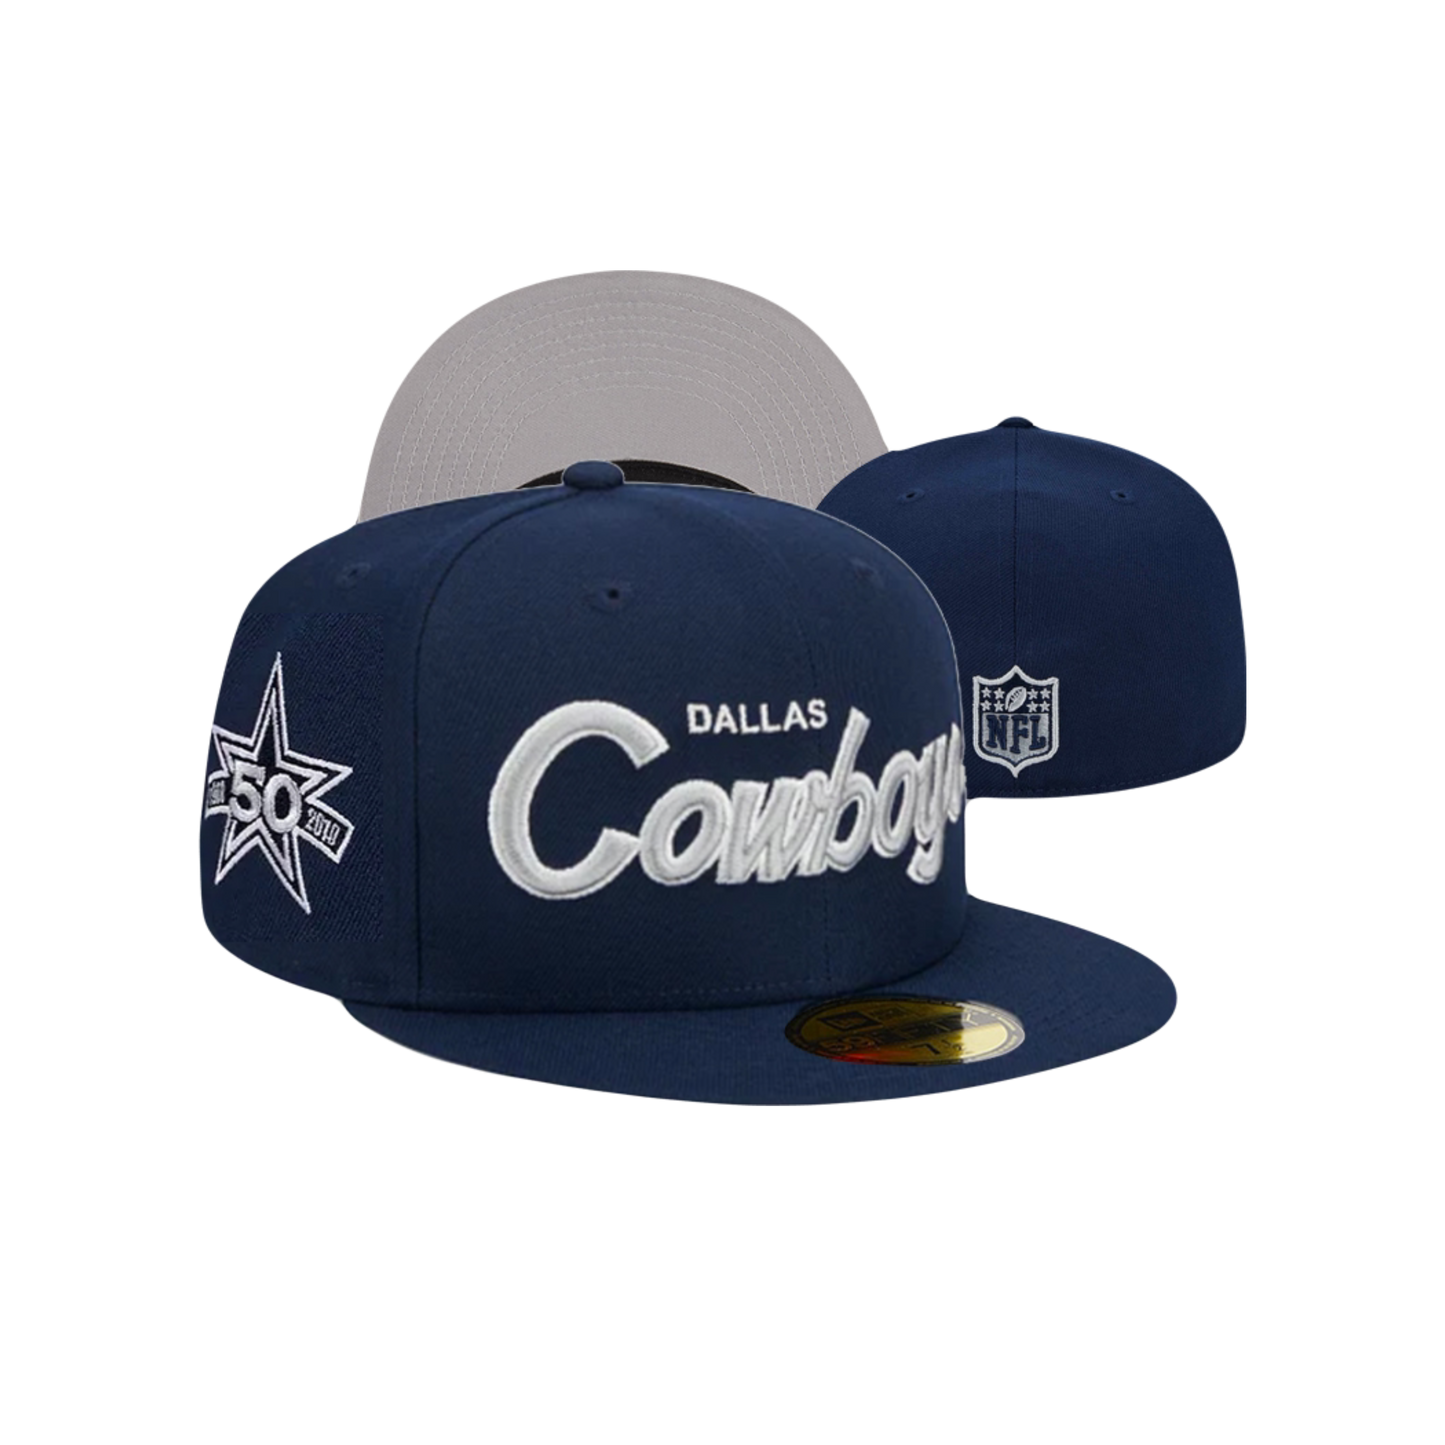 Dallas Cowboys NFL ‘50 Year Anniversary’ New Era Fitted Hat